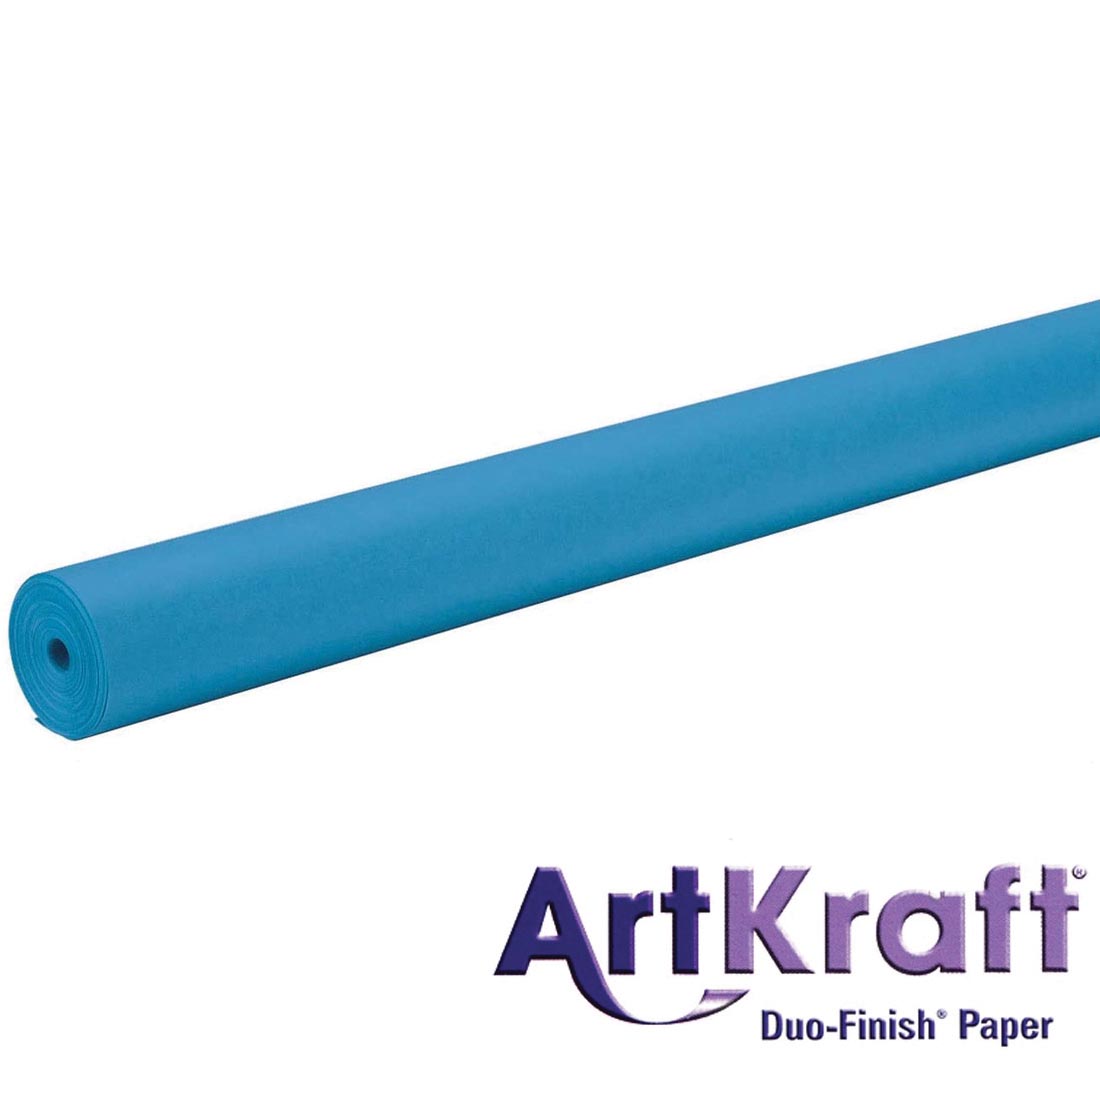 Roll of Brite Blue Paper with text ArtKraft Duo-Finish Paper